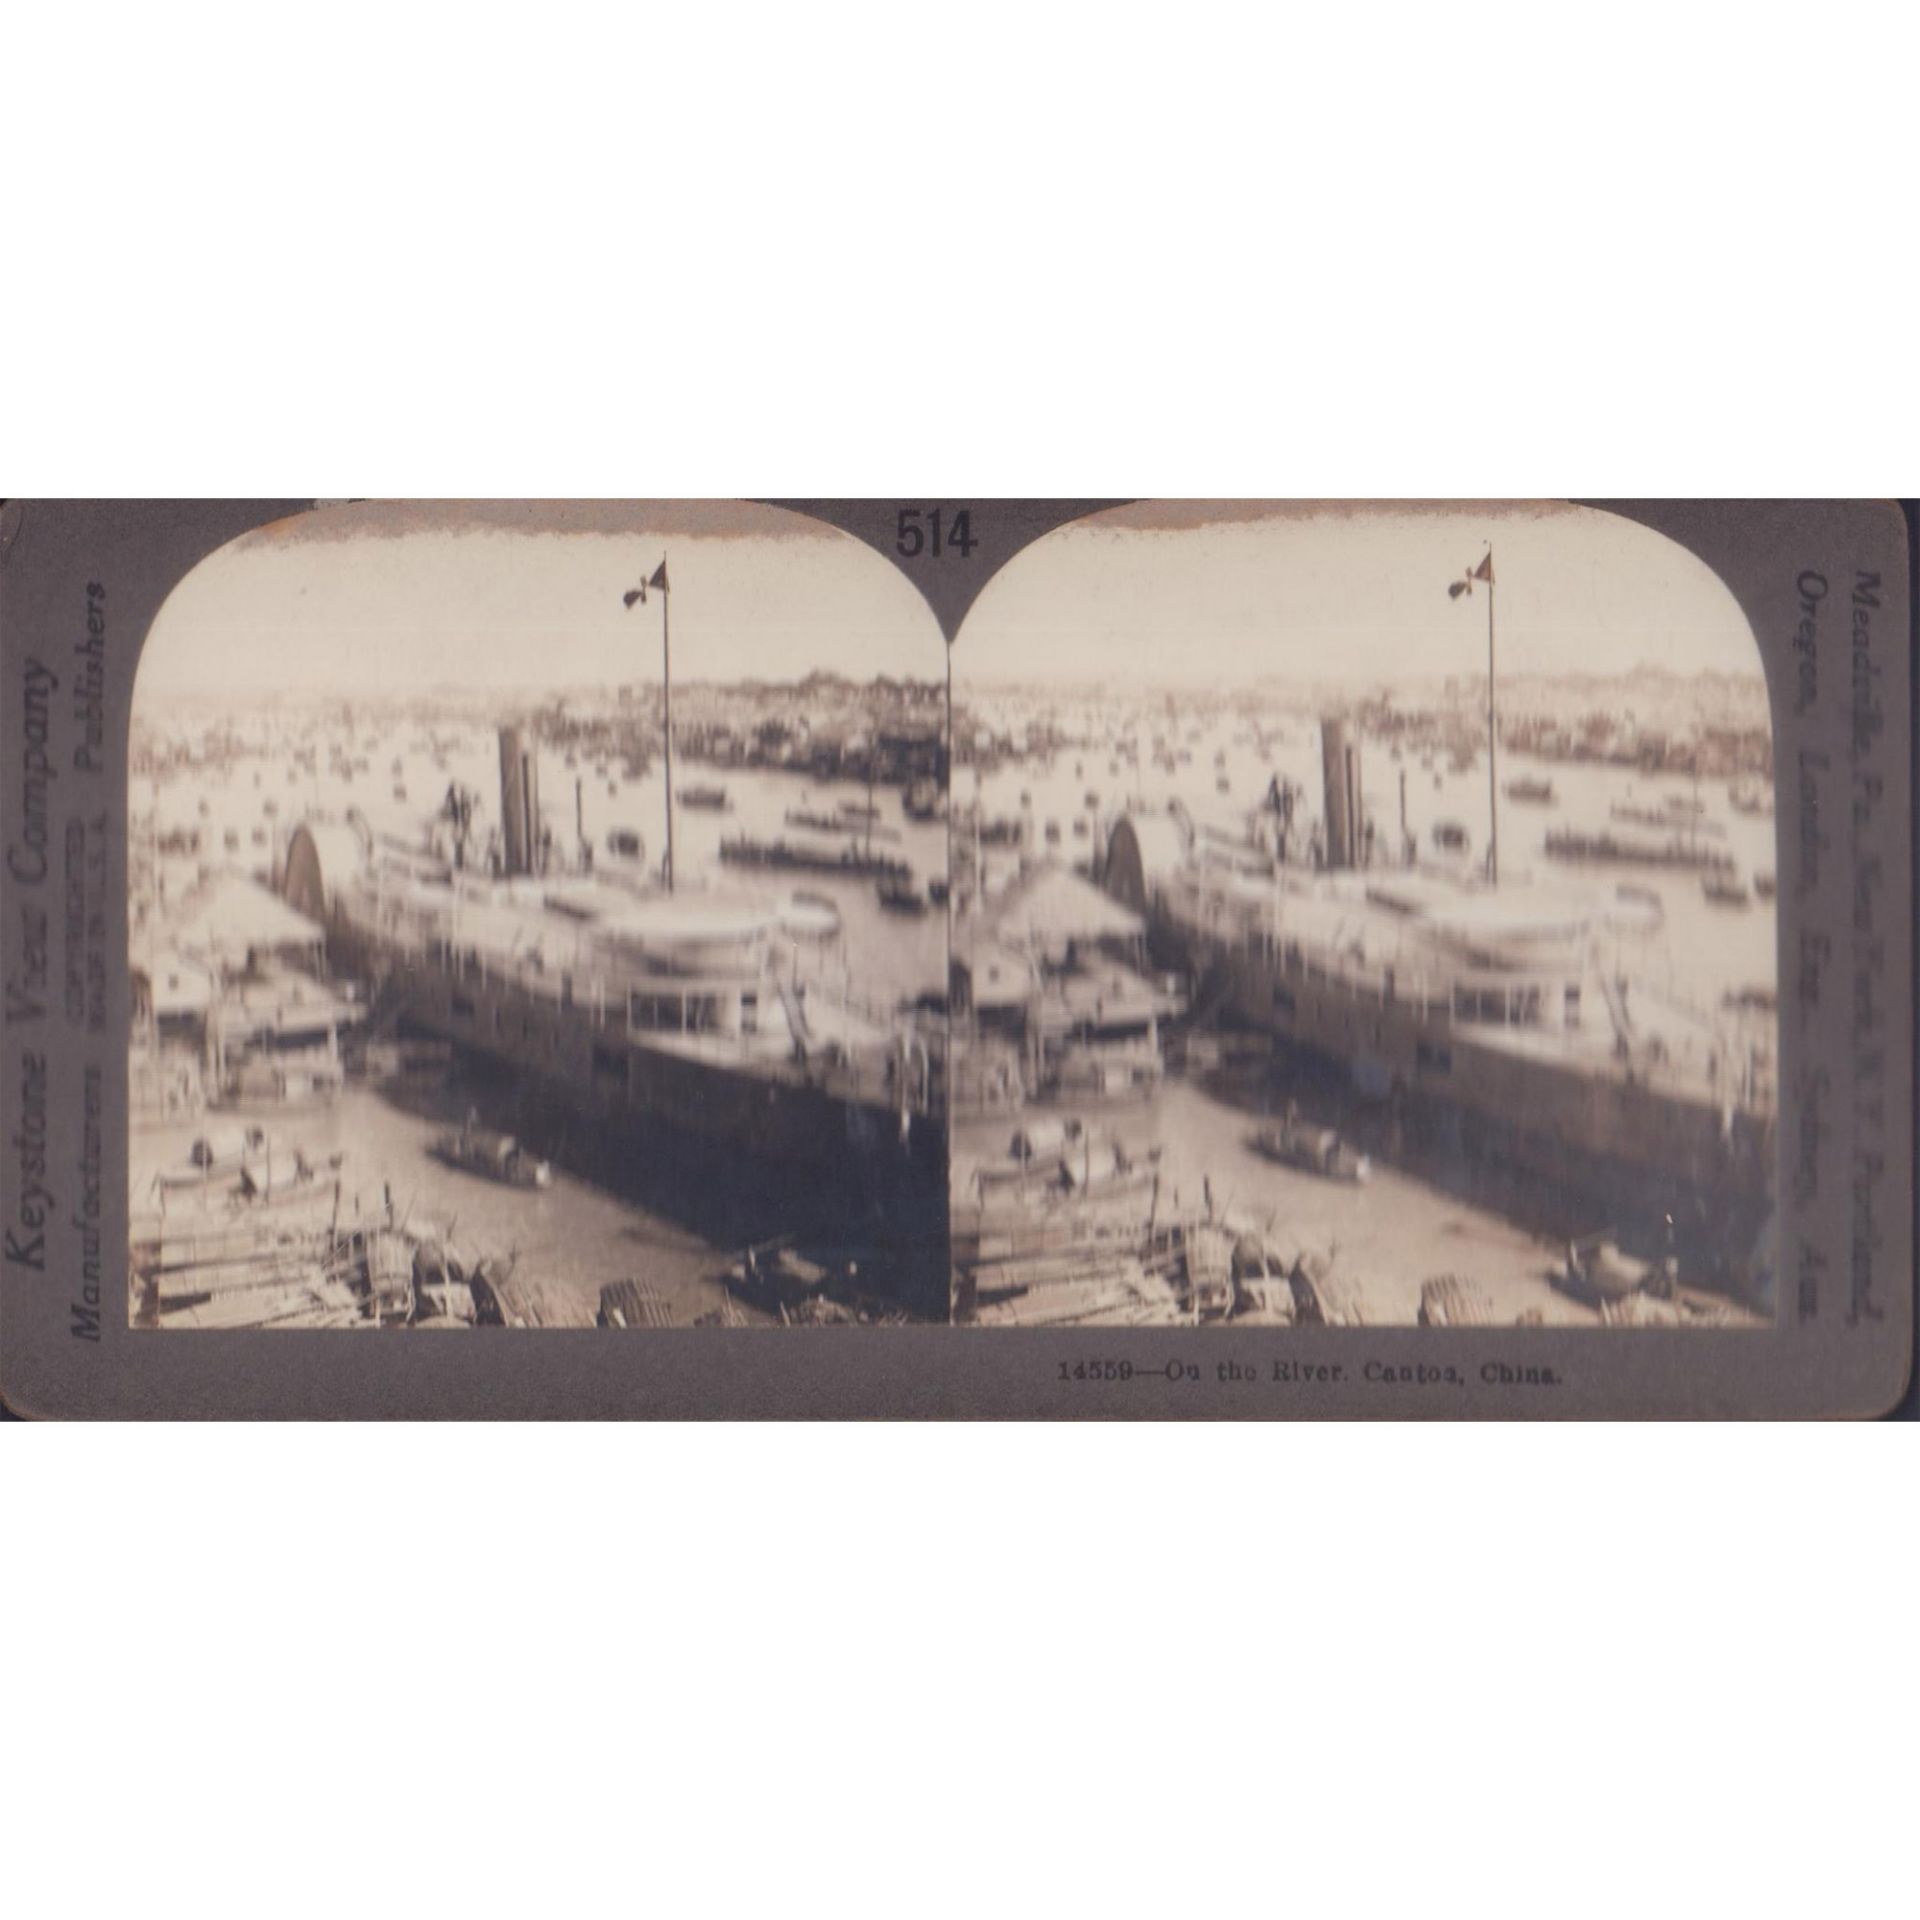 Set of Antique Stereoscopic Sepia & Color Photographs - Image 5 of 7